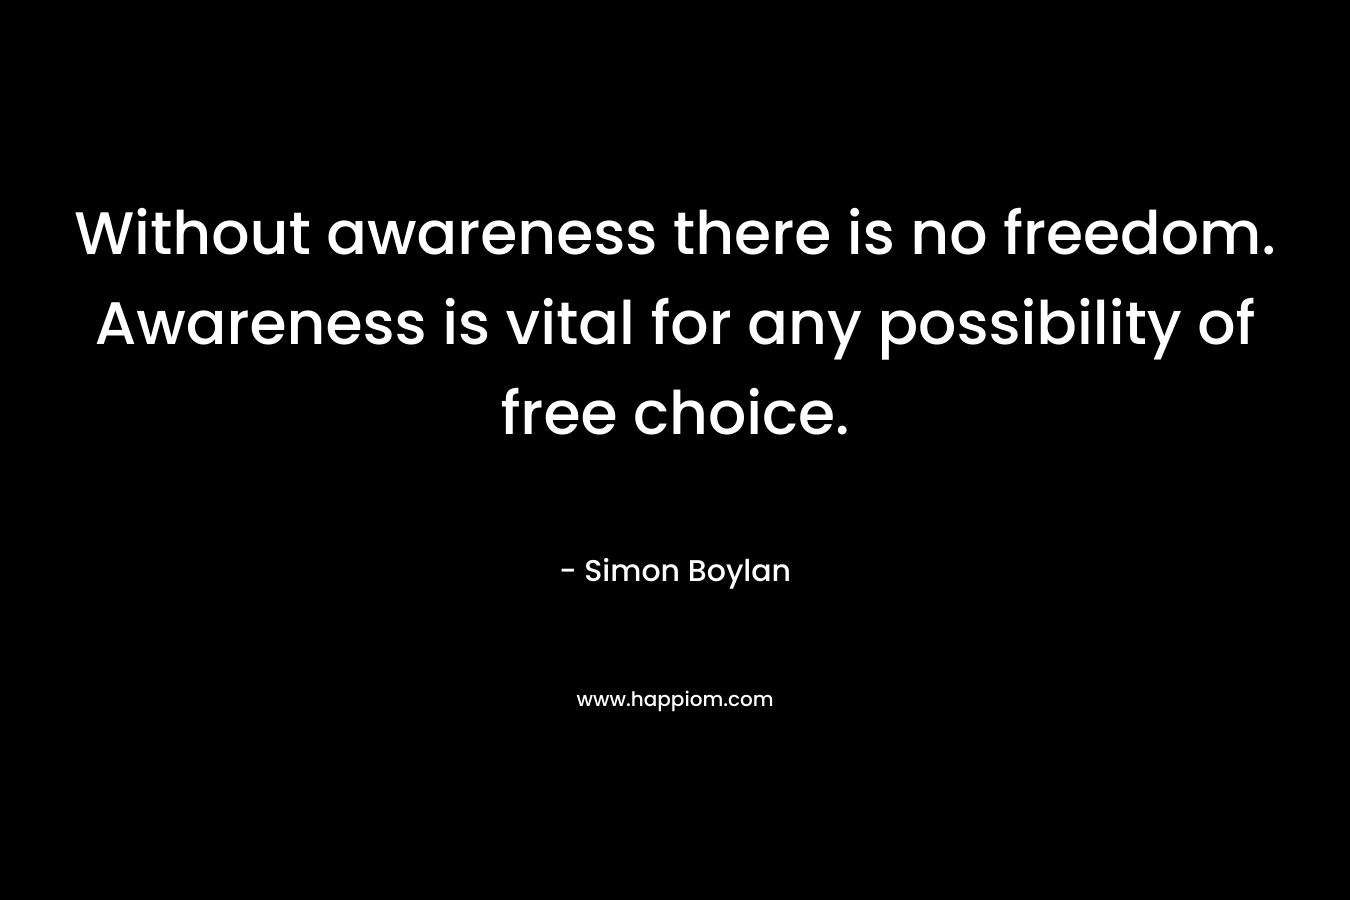 Without awareness there is no freedom. Awareness is vital for any possibility of free choice.